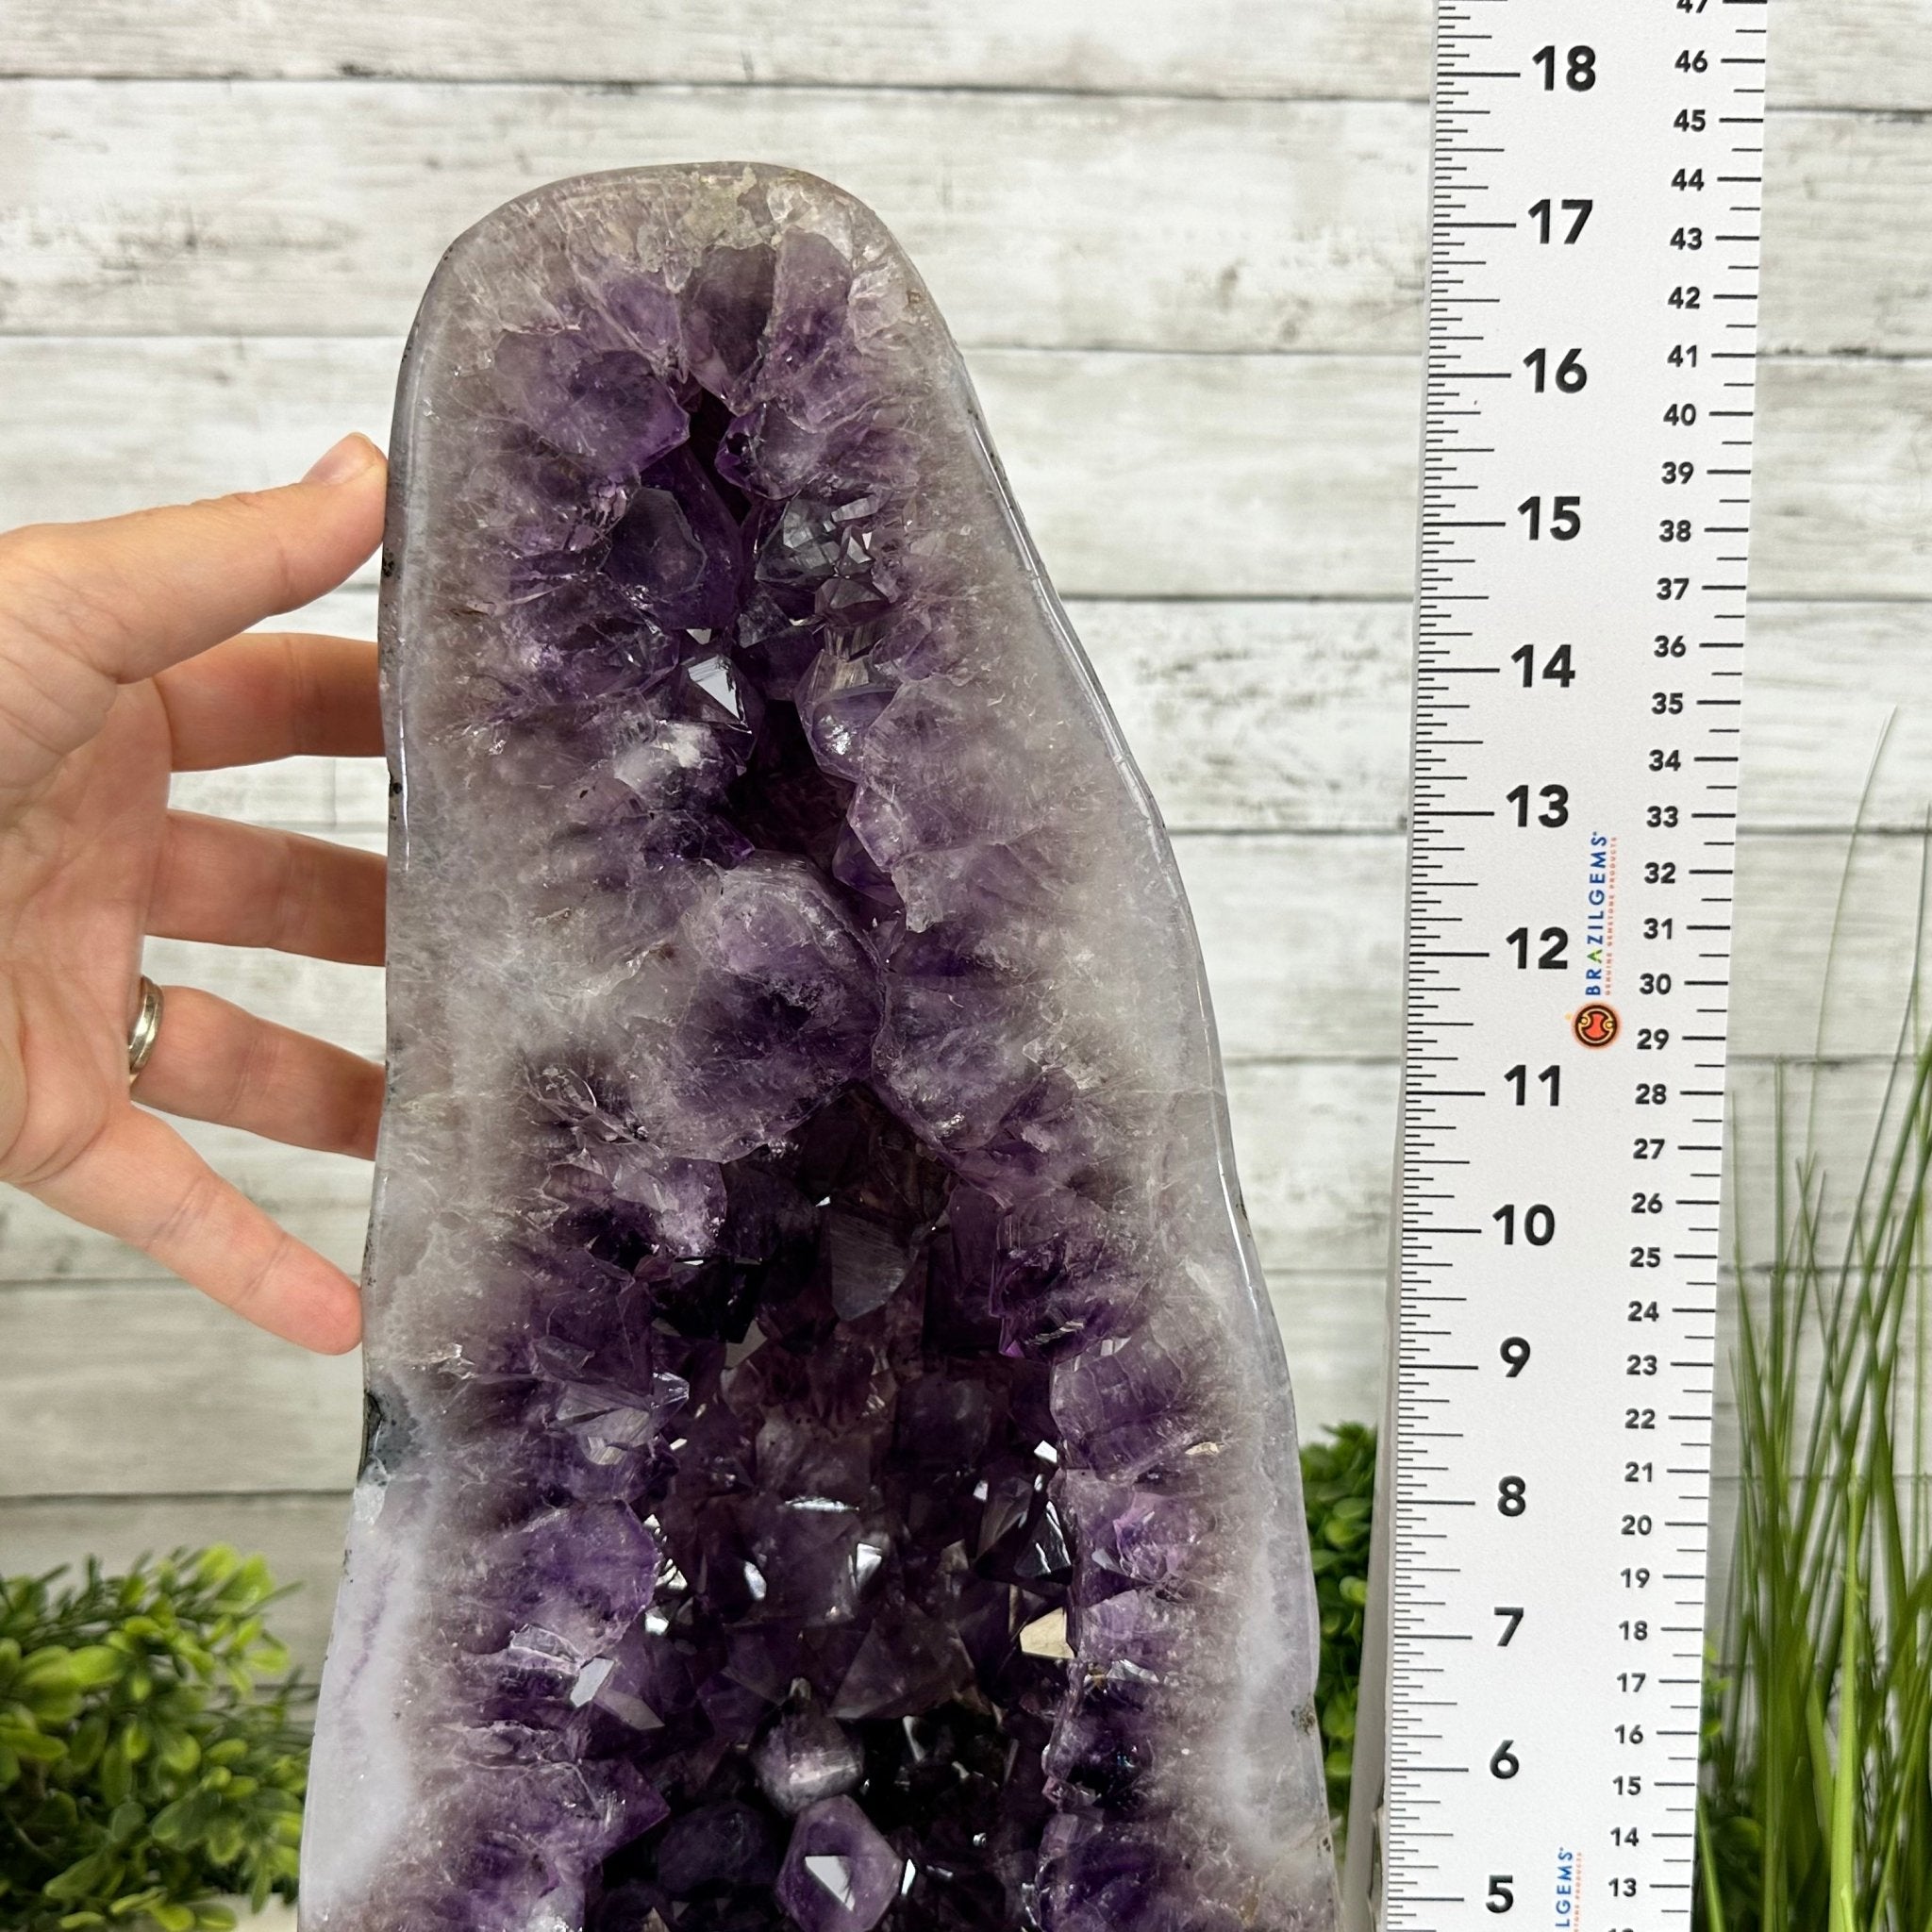 Extra Plus Quality Polished Brazilian Amethyst Cathedral, 27.8 lbs & 17.1" tall Model #5602-0156 by Brazil Gems - Brazil GemsBrazil GemsExtra Plus Quality Polished Brazilian Amethyst Cathedral, 27.8 lbs & 17.1" tall Model #5602-0156 by Brazil GemsPolished Cathedrals5602-0156